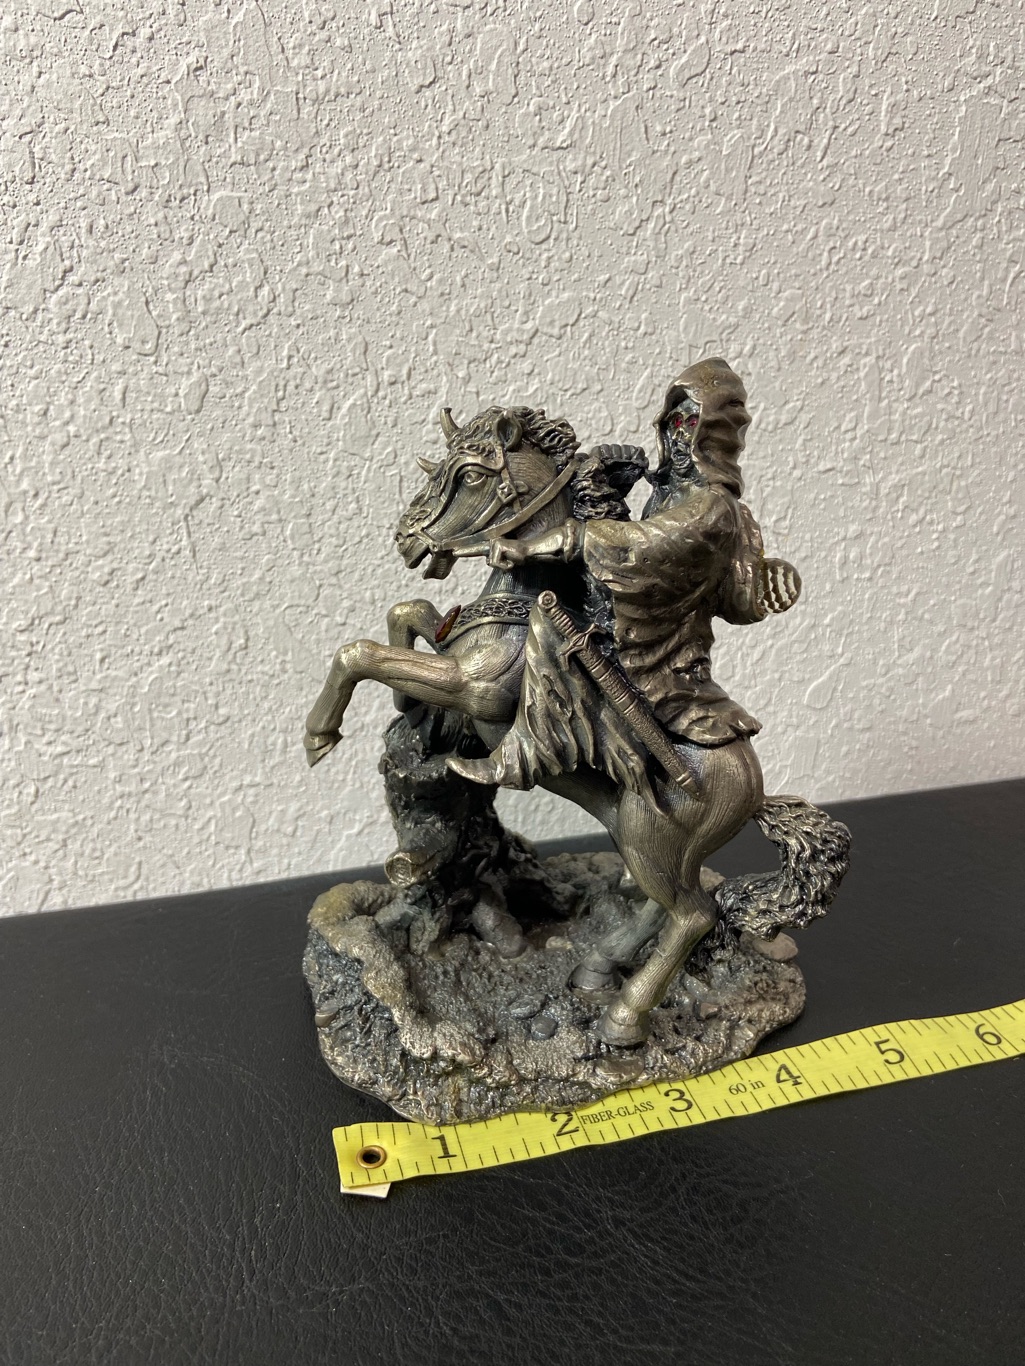 Lord of the Rings A Black Rider Figure